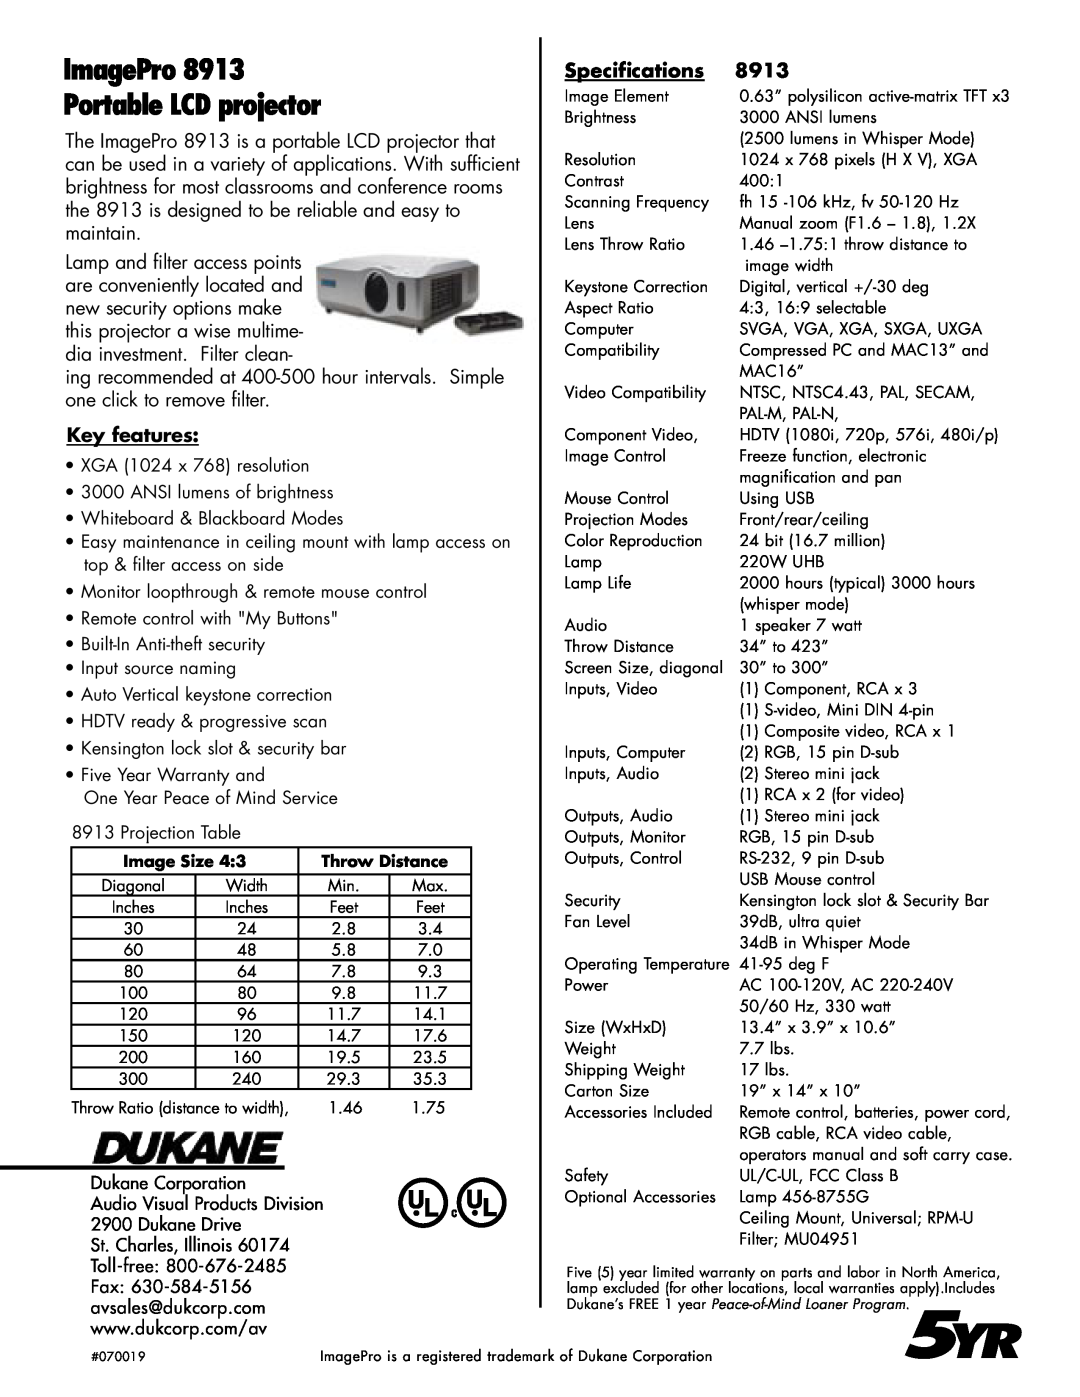 Dukane 8913 manual ImagePro Portable LCD projector, Key features, Specifications 